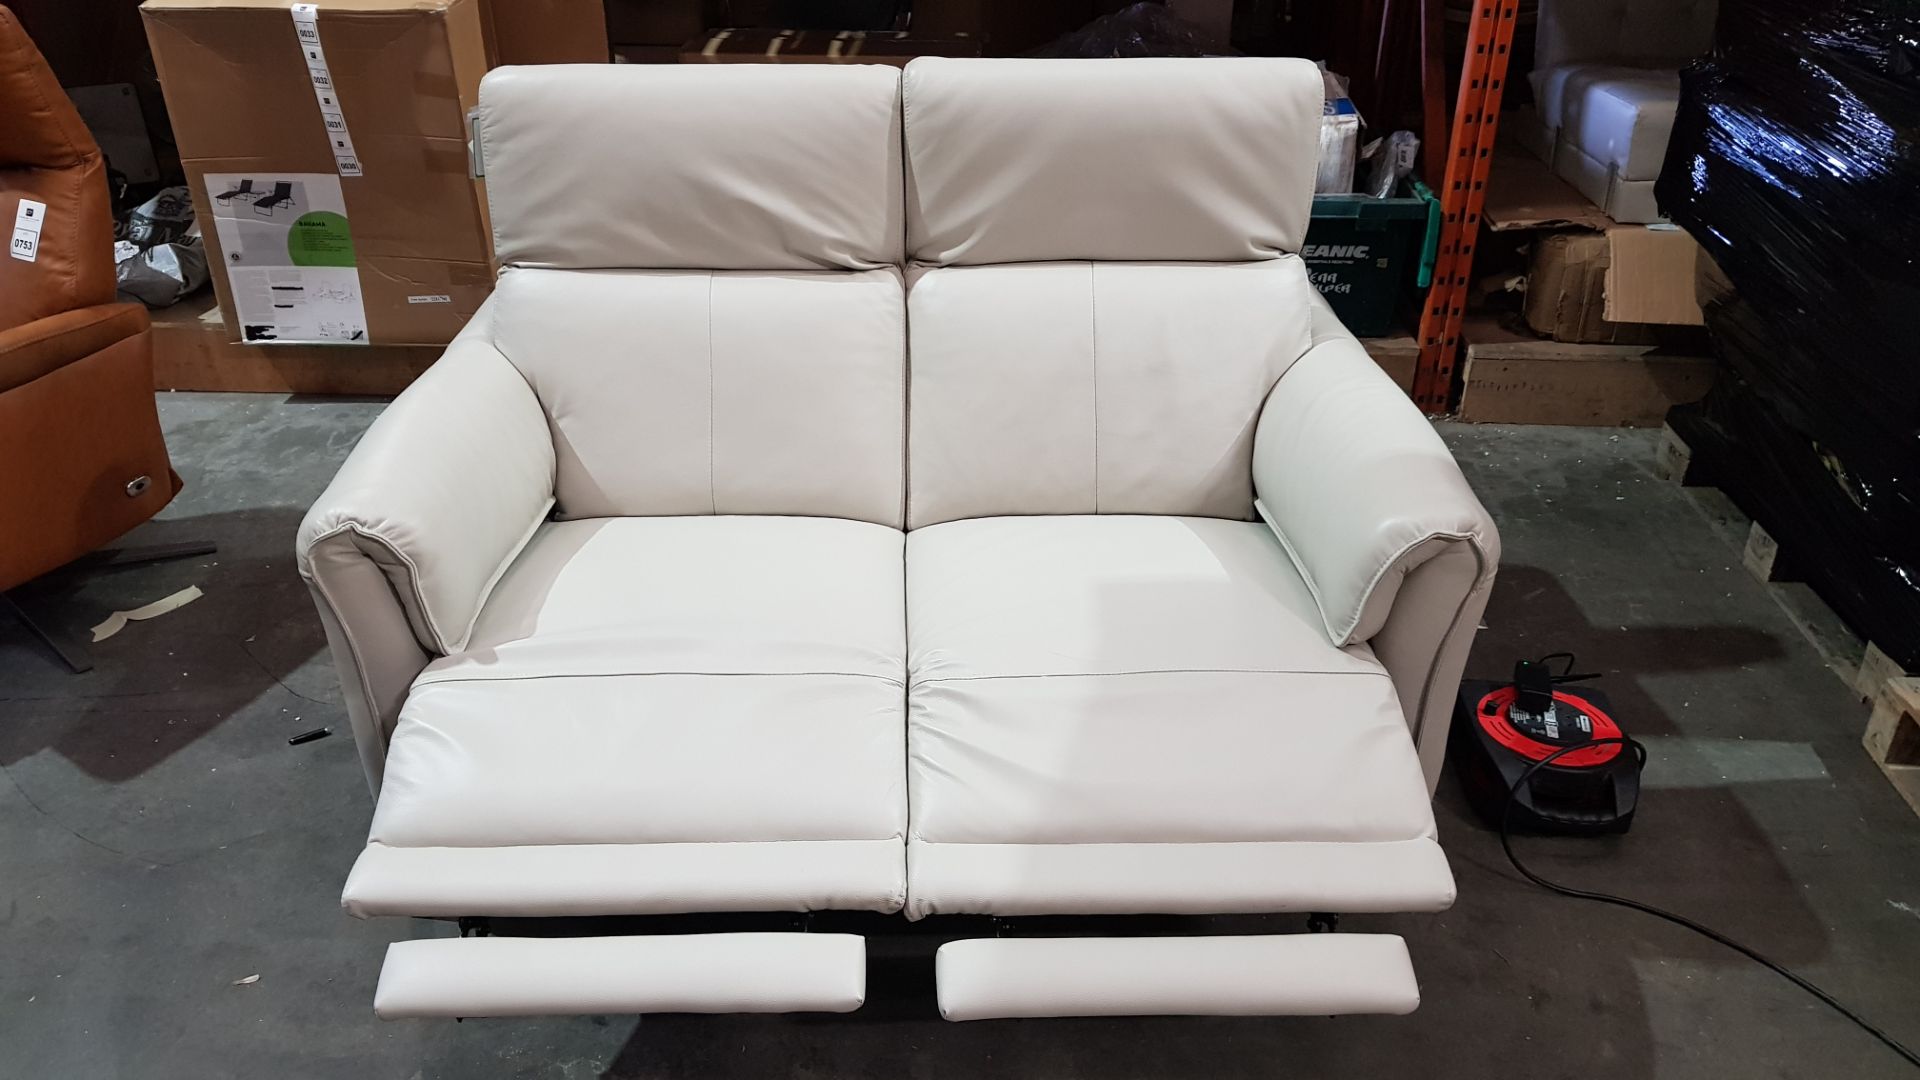 1 X RUSSO 2 SEATER LEATHER LOOK ELECTRIC RECLINER SOFA IN CREAM COLOUR WITH METAL LEGS - FULLY